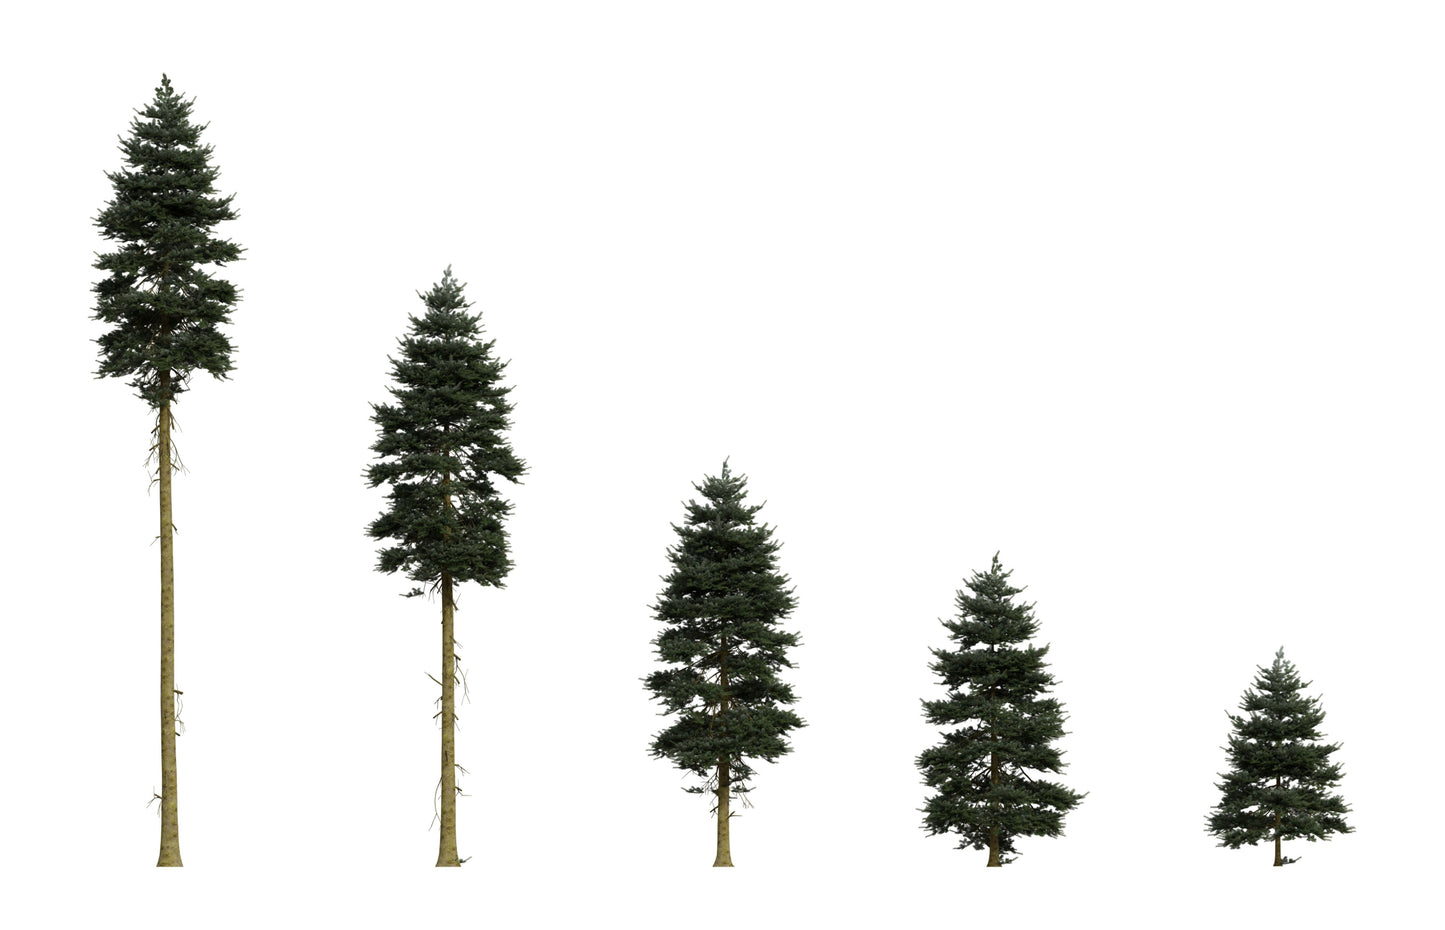 Grow Your Own CHRISTMAS TREE - Douglas Fir ( Pseudotsuga Menziesii ) Gift Packet of Tree Seeds